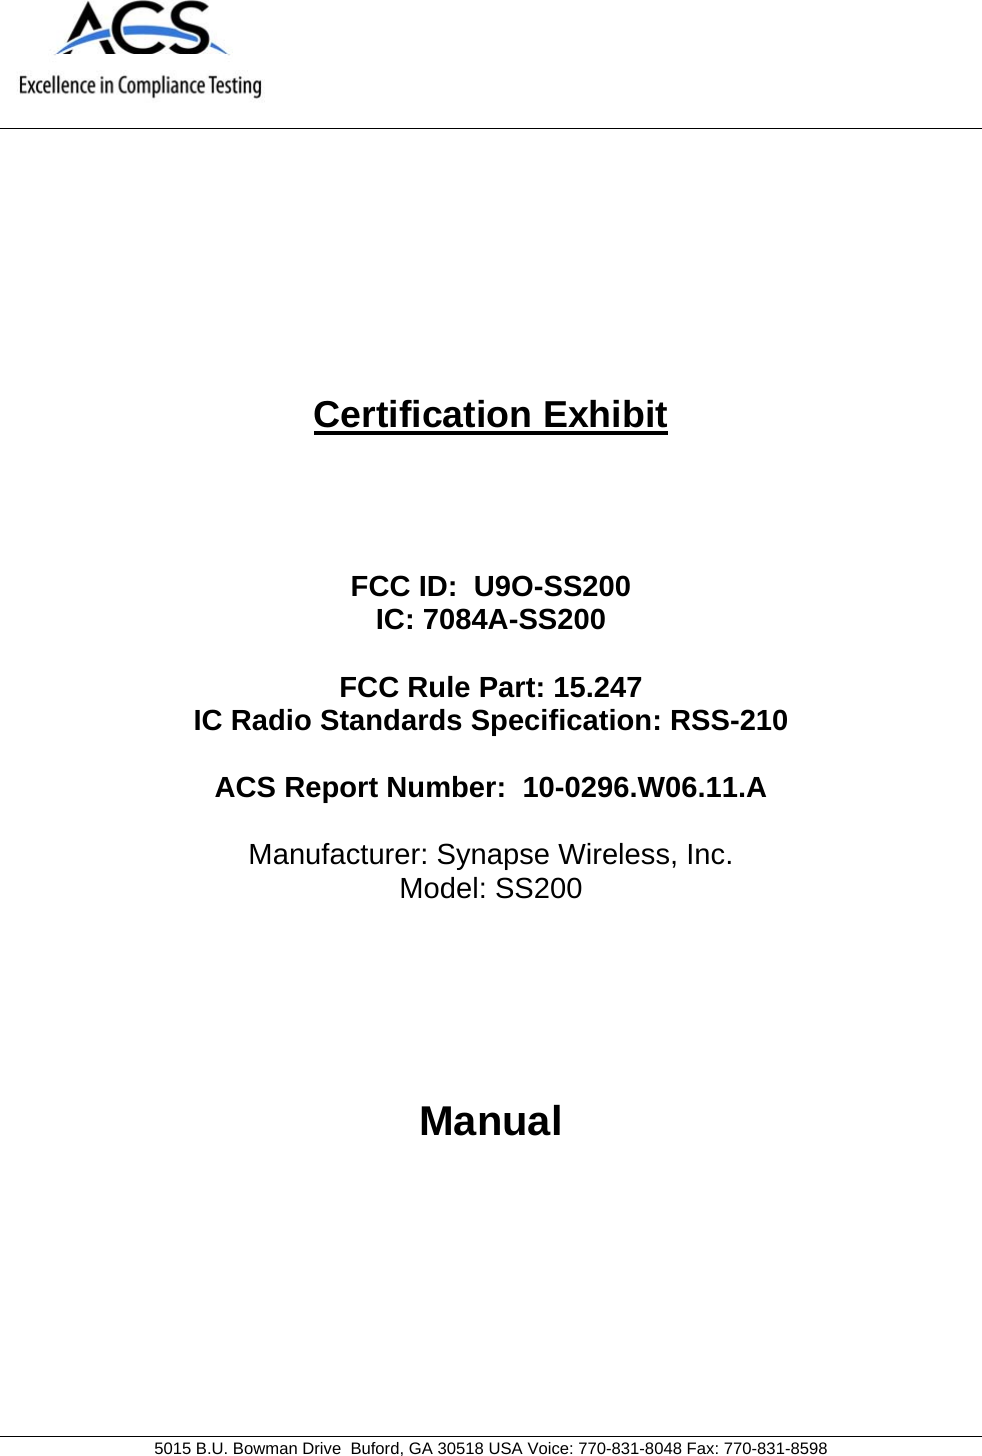     5015 B.U. Bowman Drive  Buford, GA 30518 USA Voice: 770-831-8048 Fax: 770-831-8598   Certification Exhibit     FCC ID:  U9O-SS200 IC: 7084A-SS200  FCC Rule Part: 15.247 IC Radio Standards Specification: RSS-210  ACS Report Number:  10-0296.W06.11.A   Manufacturer: Synapse Wireless, Inc. Model: SS200     Manual  